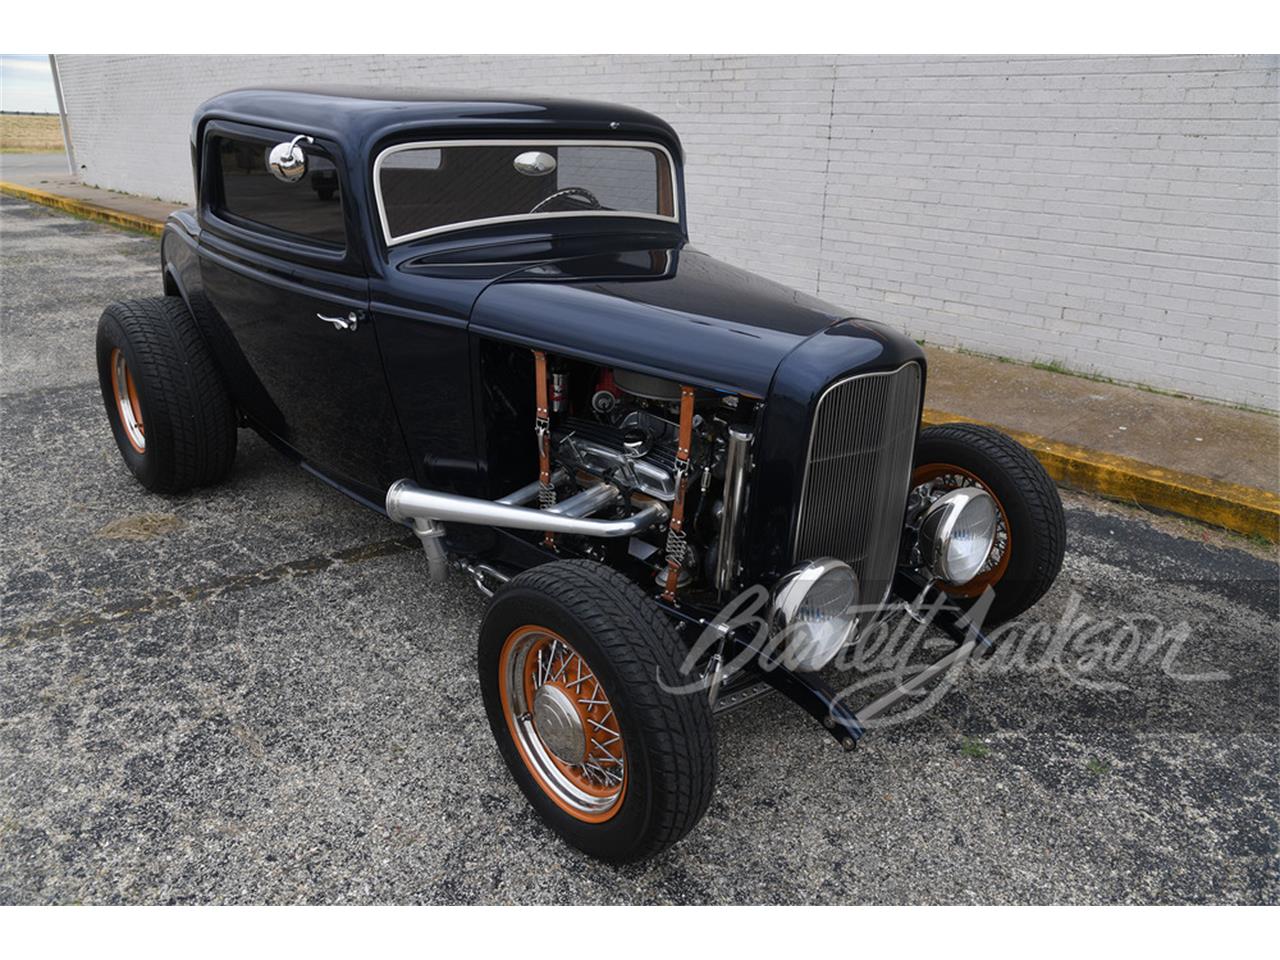 For Sale at Auction: 1932 Ford Custom in Scottsdale, Arizona for sale in Scottsdale, AZ